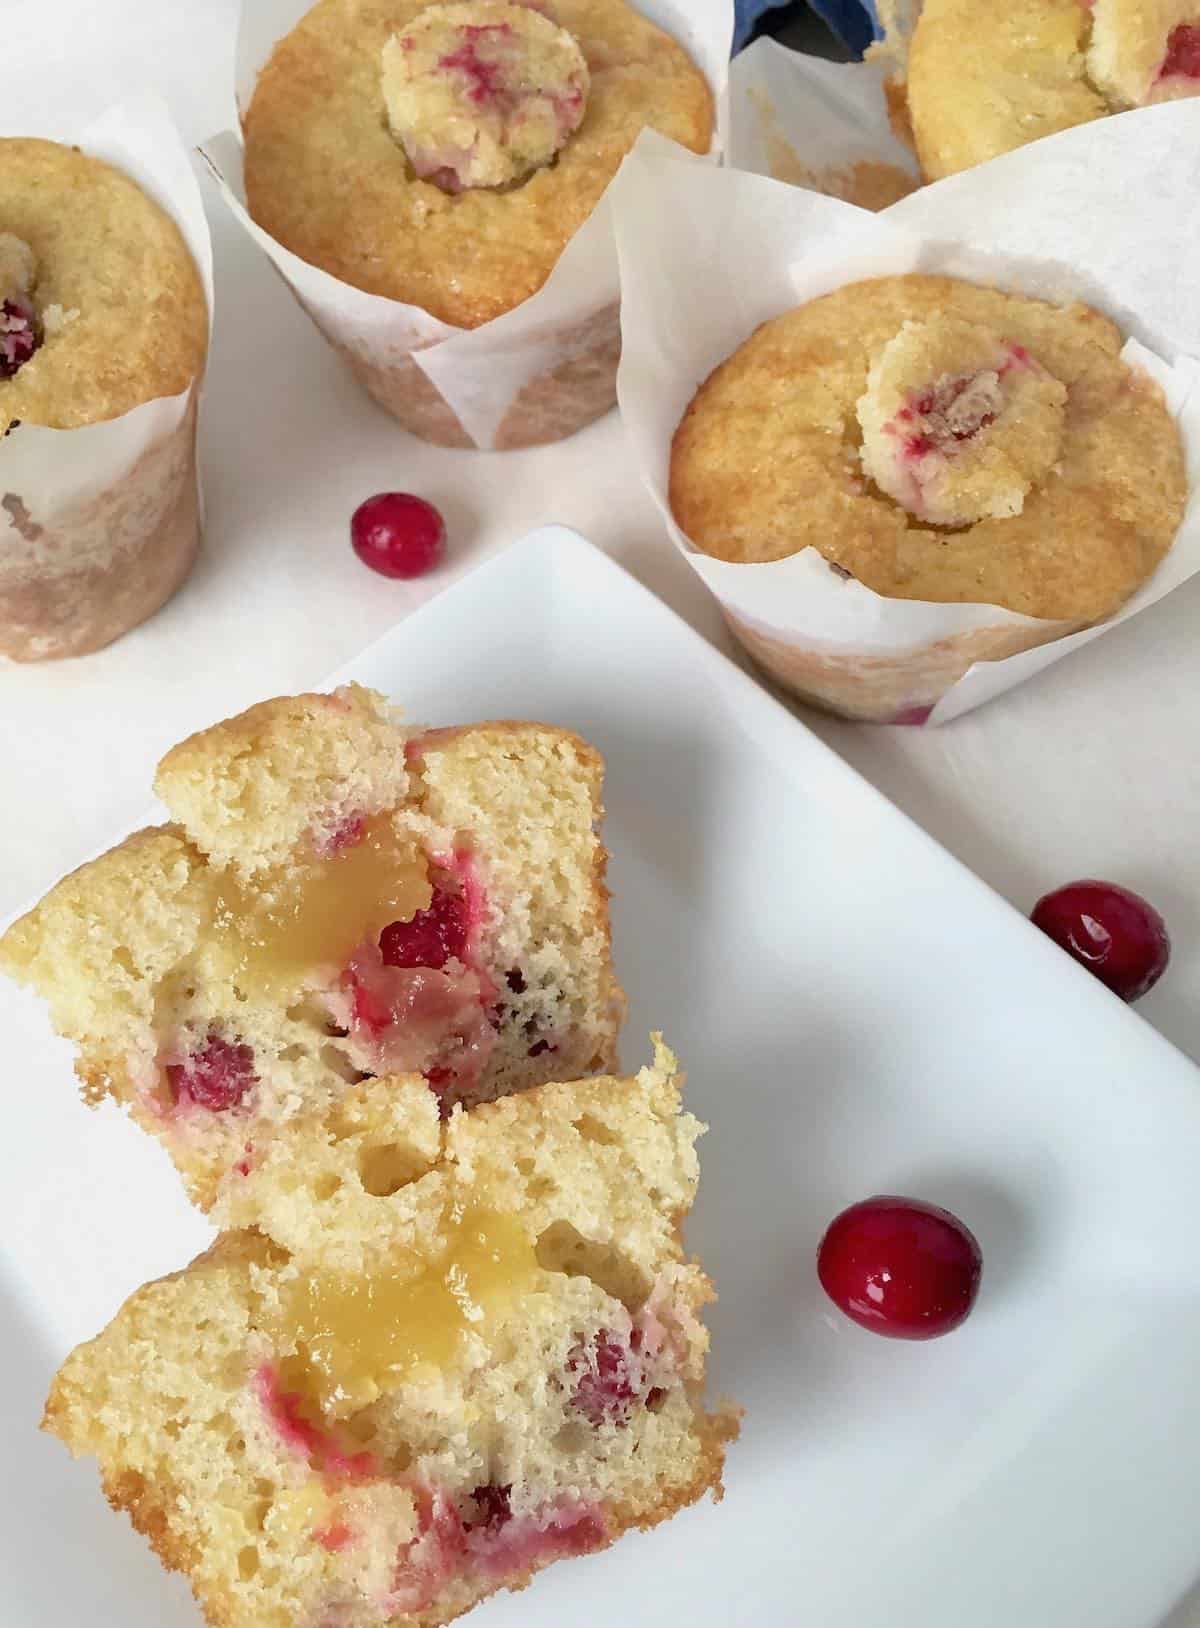 Cranberry lemon muffins made with the best cranberries for all seasons.